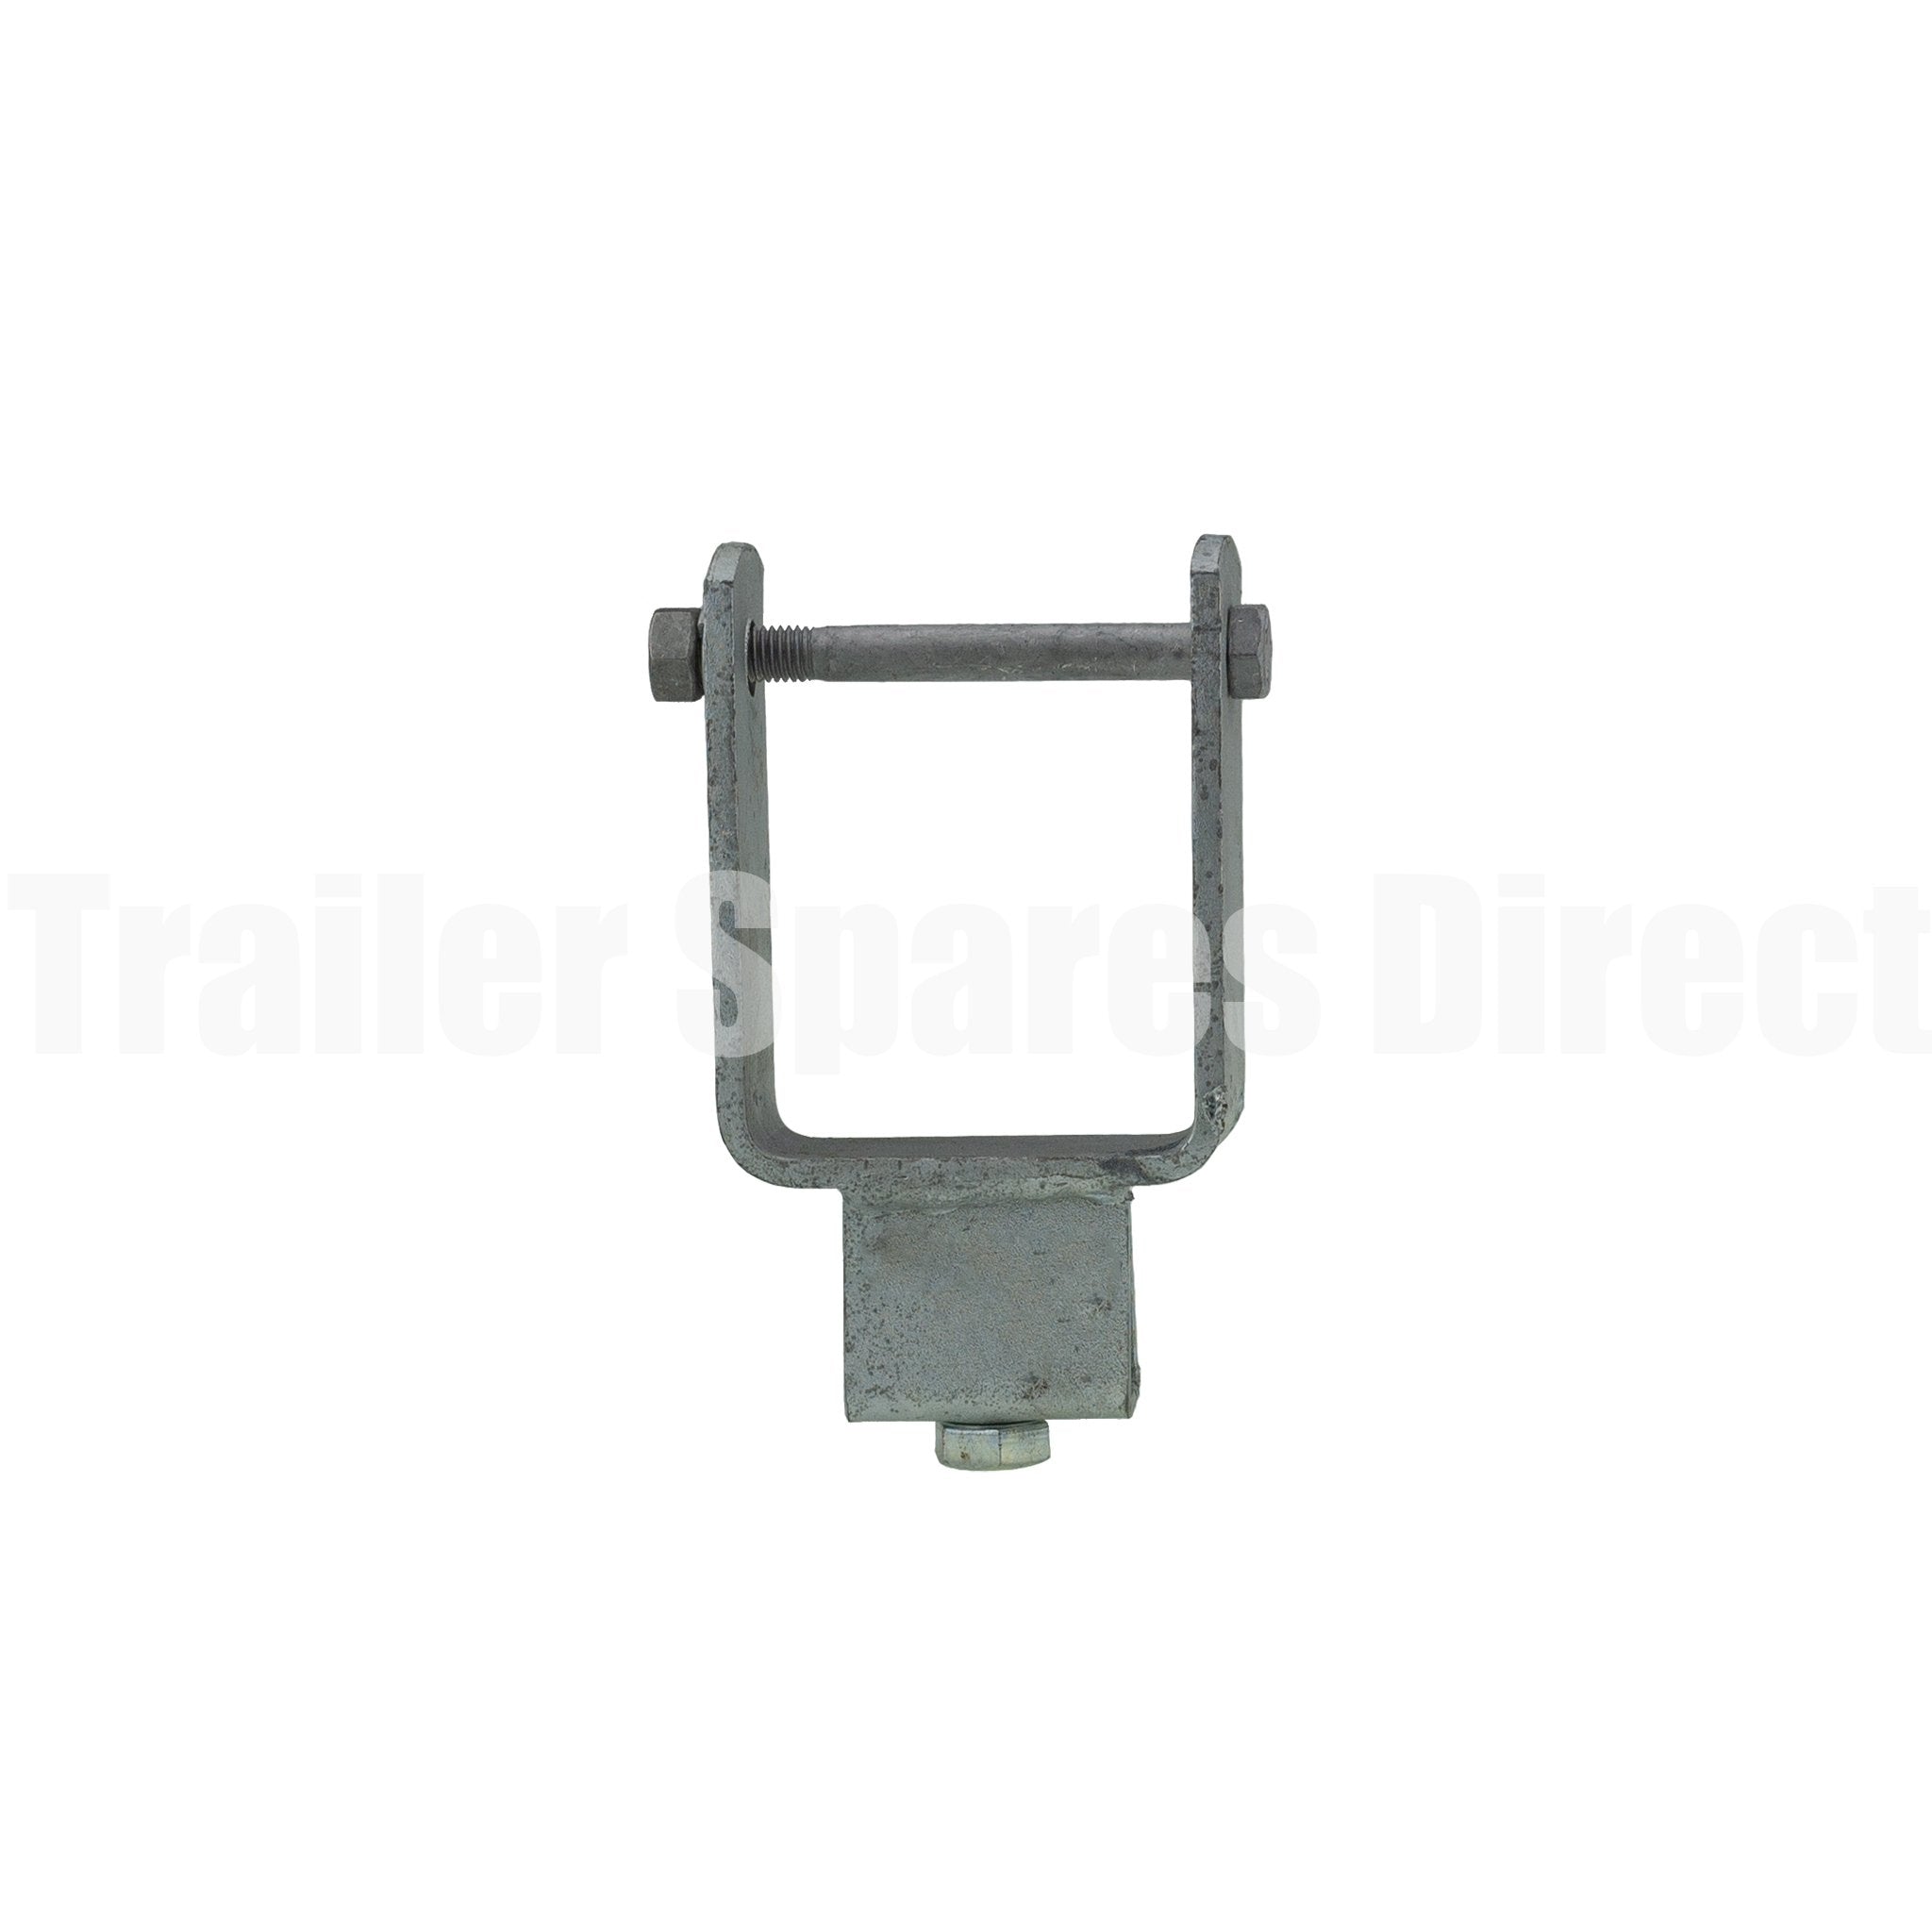 Tube slide adjuster 75mm with 3 x 3 inch